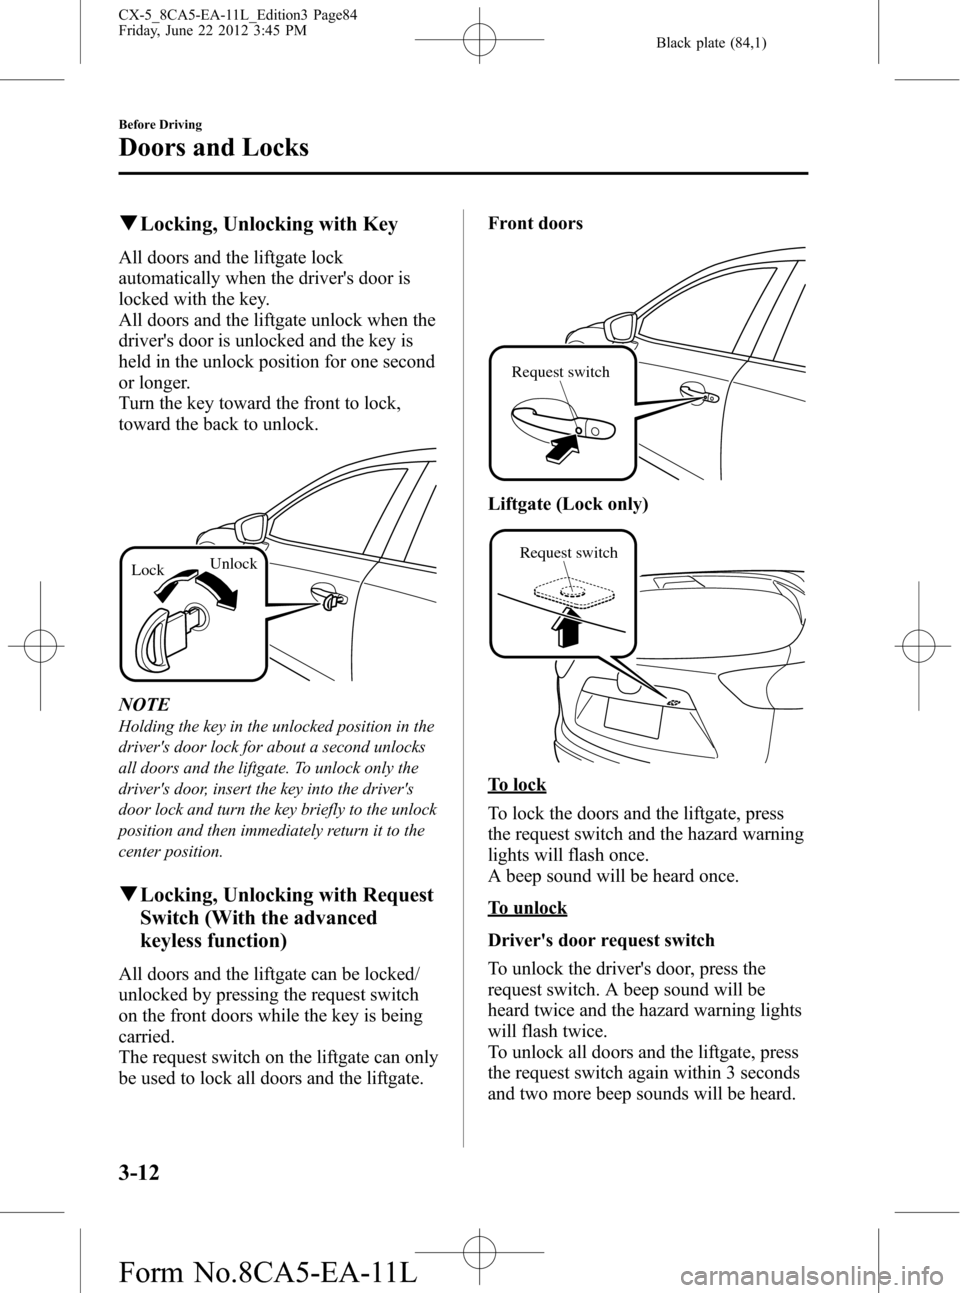 MAZDA MODEL CX-5 2013  Owners Manual (in English) Black plate (84,1)
qLocking, Unlocking with Key
All doors and the liftgate lock
automatically when the drivers door is
locked with the key.
All doors and the liftgate unlock when the
drivers door is